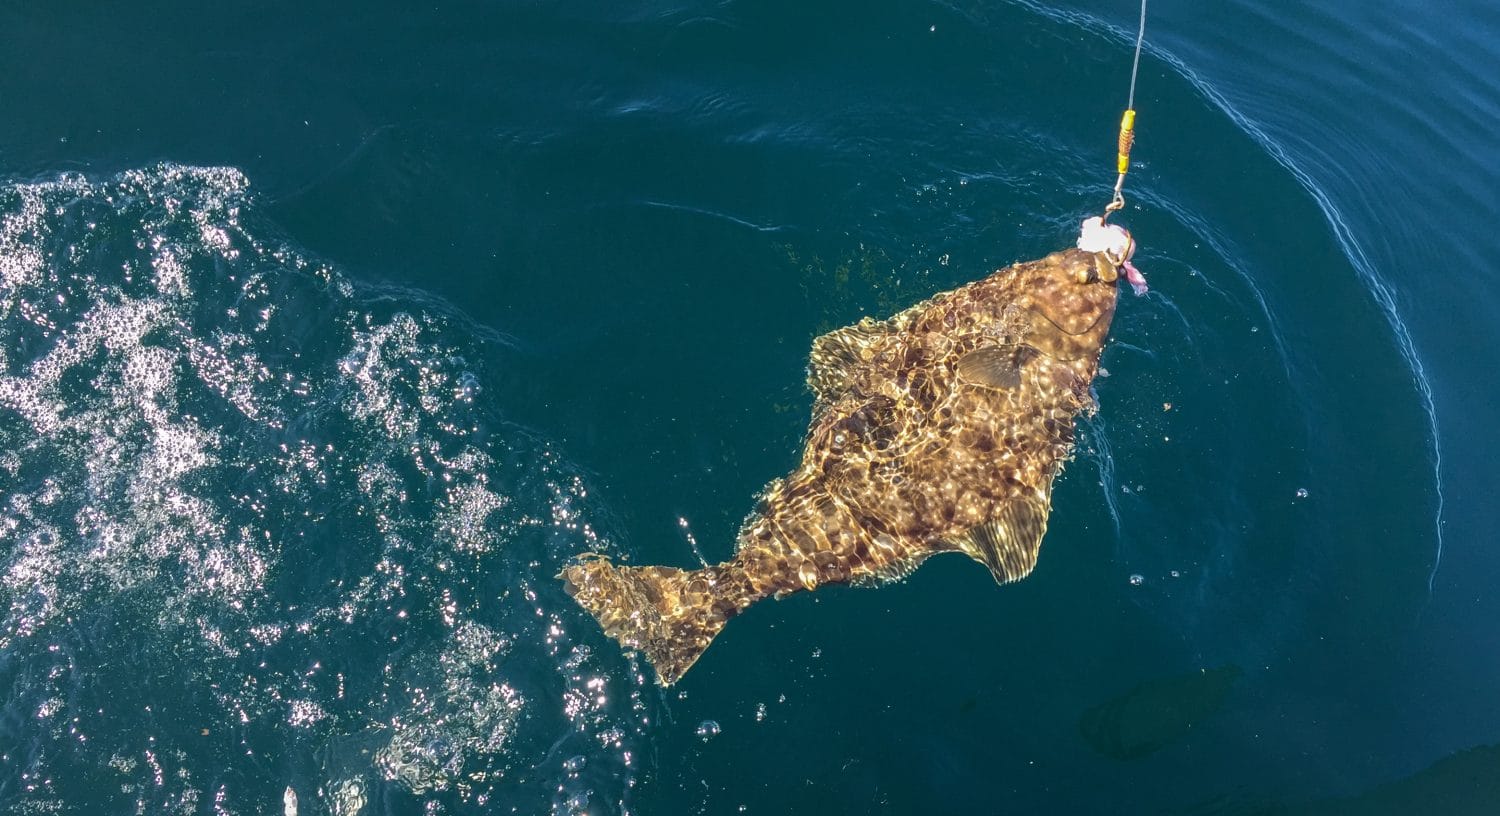 A bottom feeding Alaskan halibut has been pulled to the surface by a sport fisher.